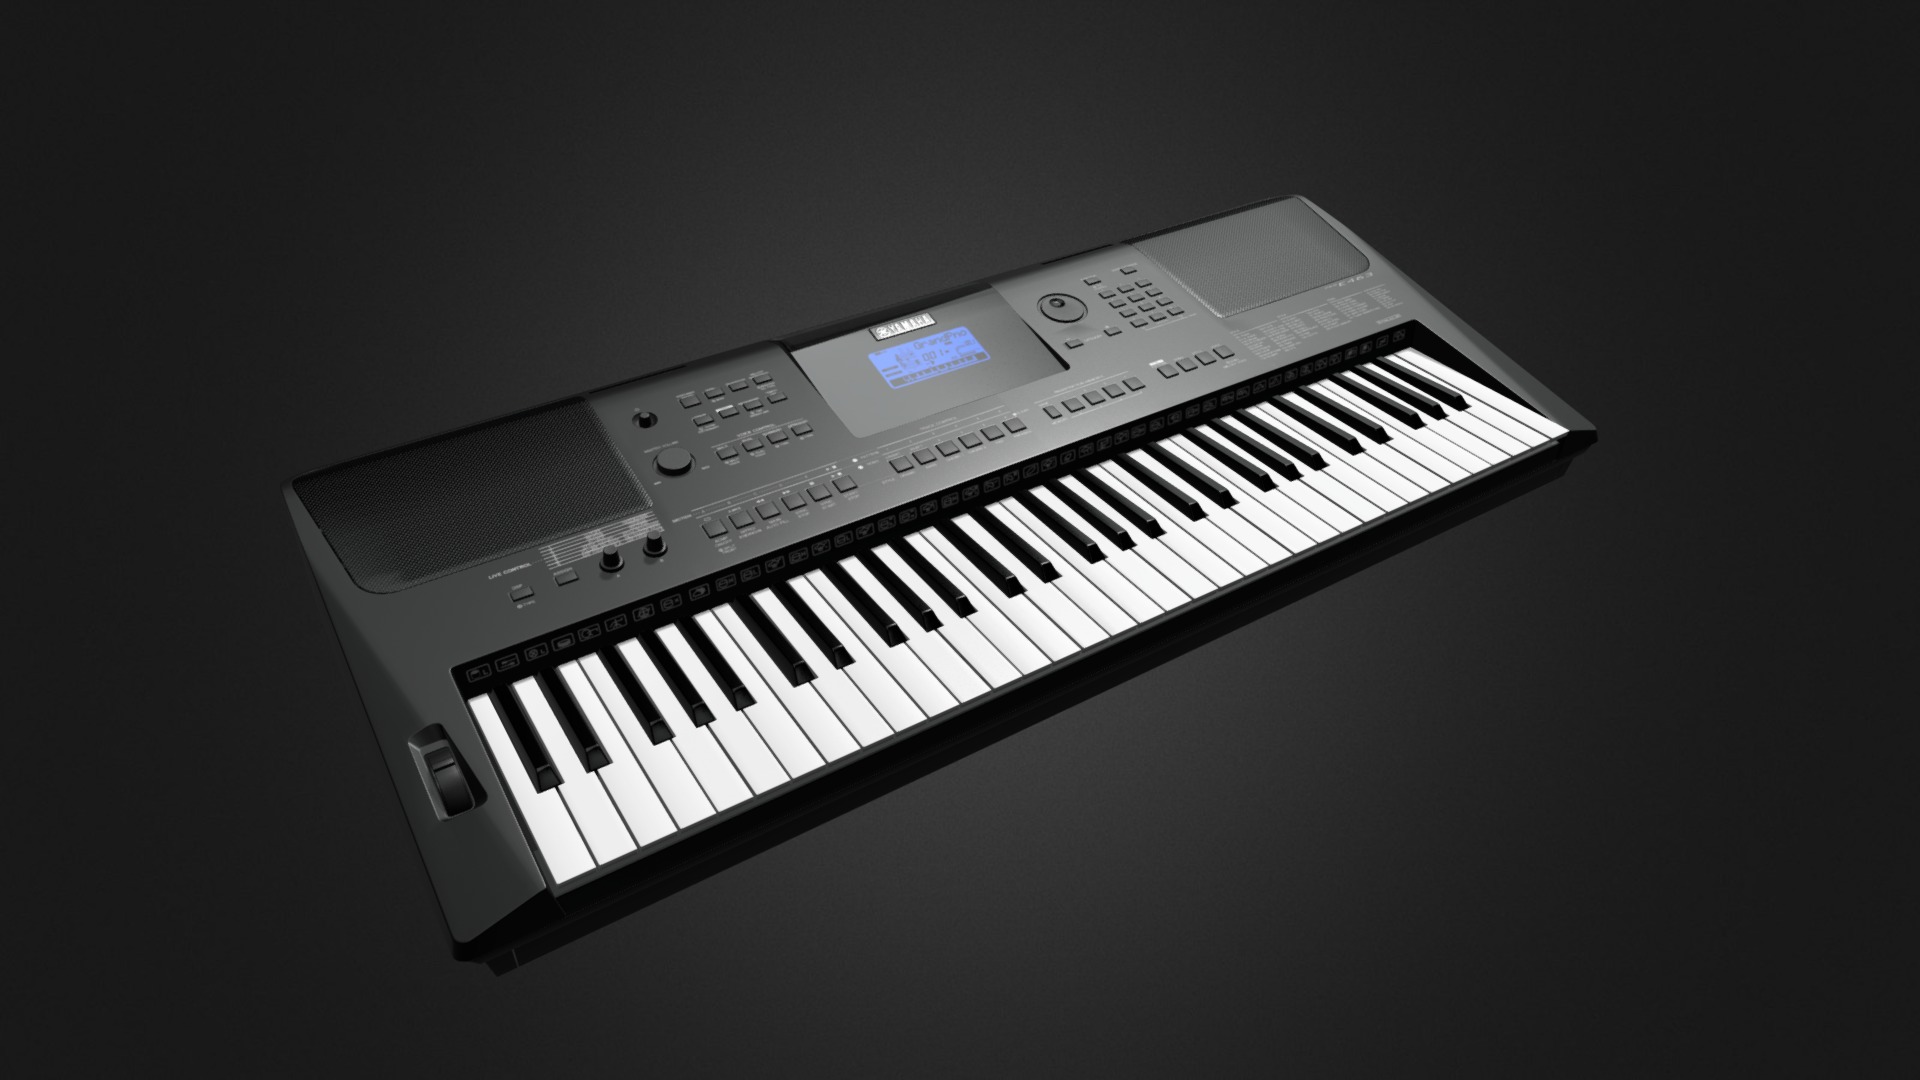 3D model YAMAHA PSR-E453 original - This is a 3D model of the YAMAHA PSR-E453 original. The 3D model is about a white and black keyboard.